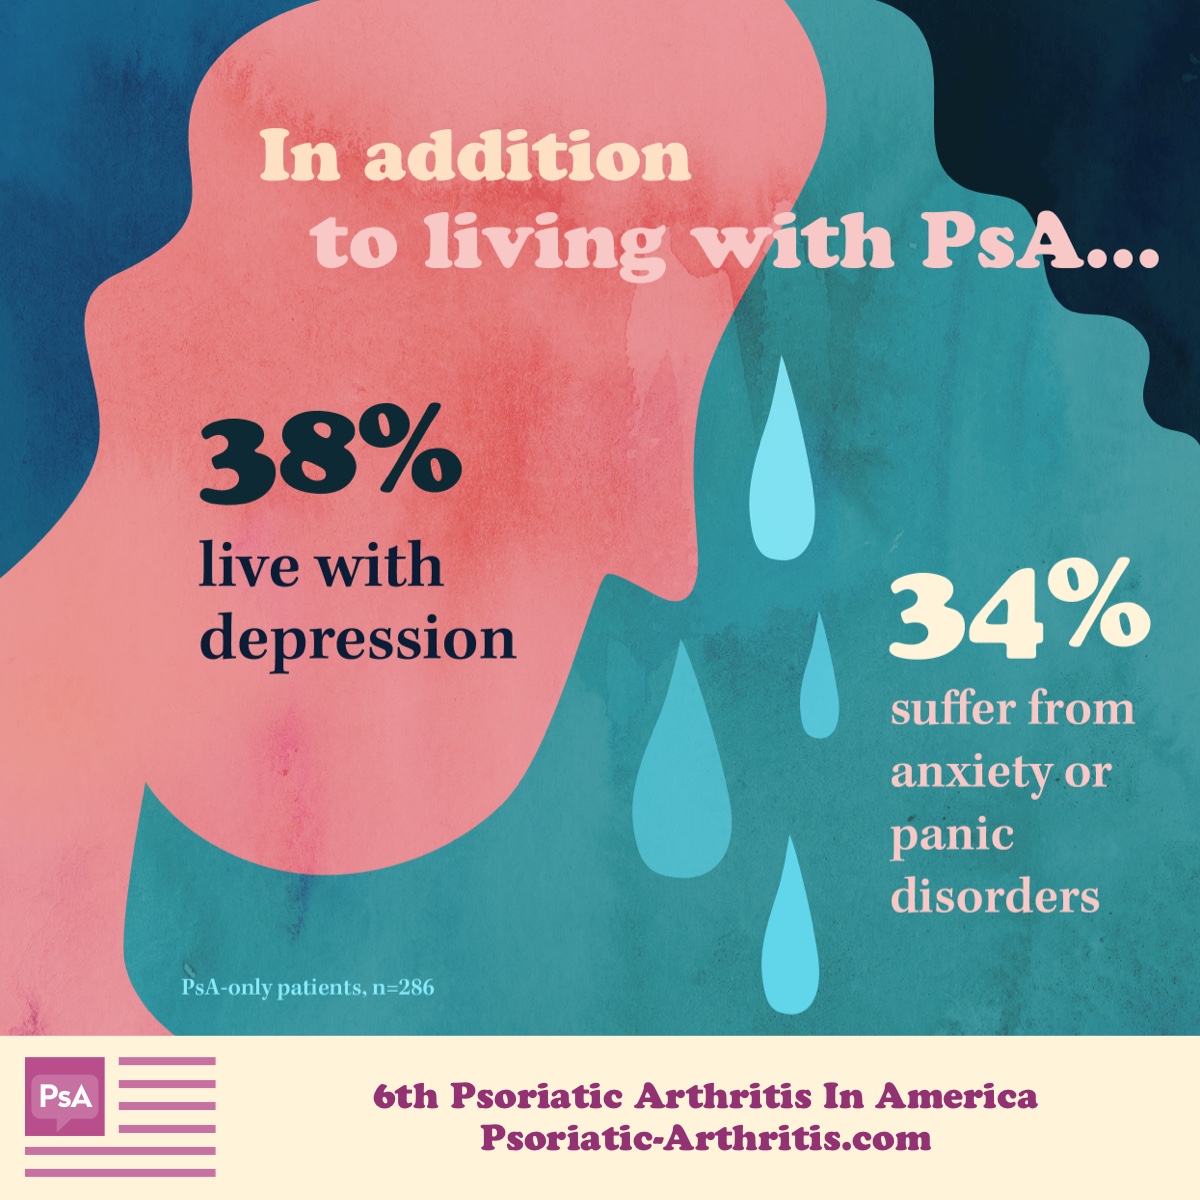 Layered colors of pink, teal and blue with light blue tear drops to depict the mental impact of PsA.